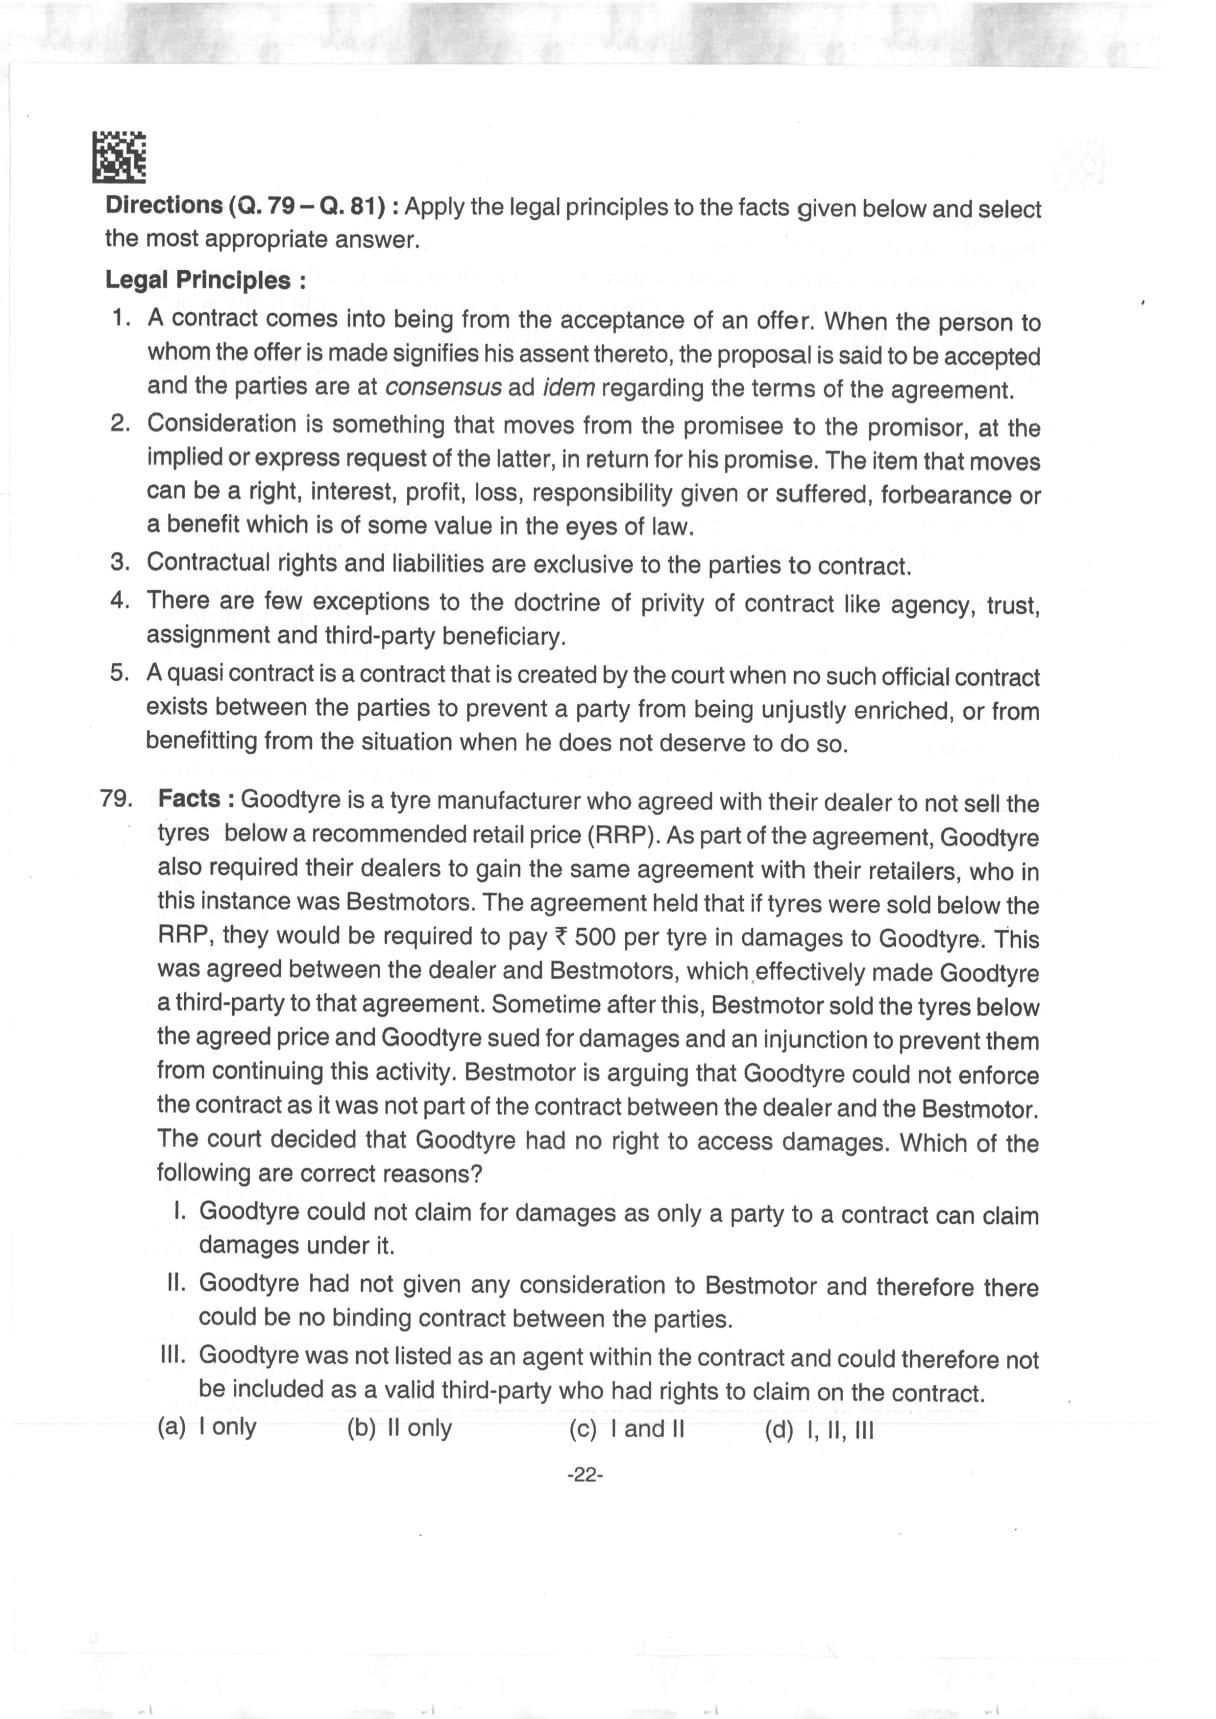 AILET 2019 Question Paper for BA LLB - Page 22